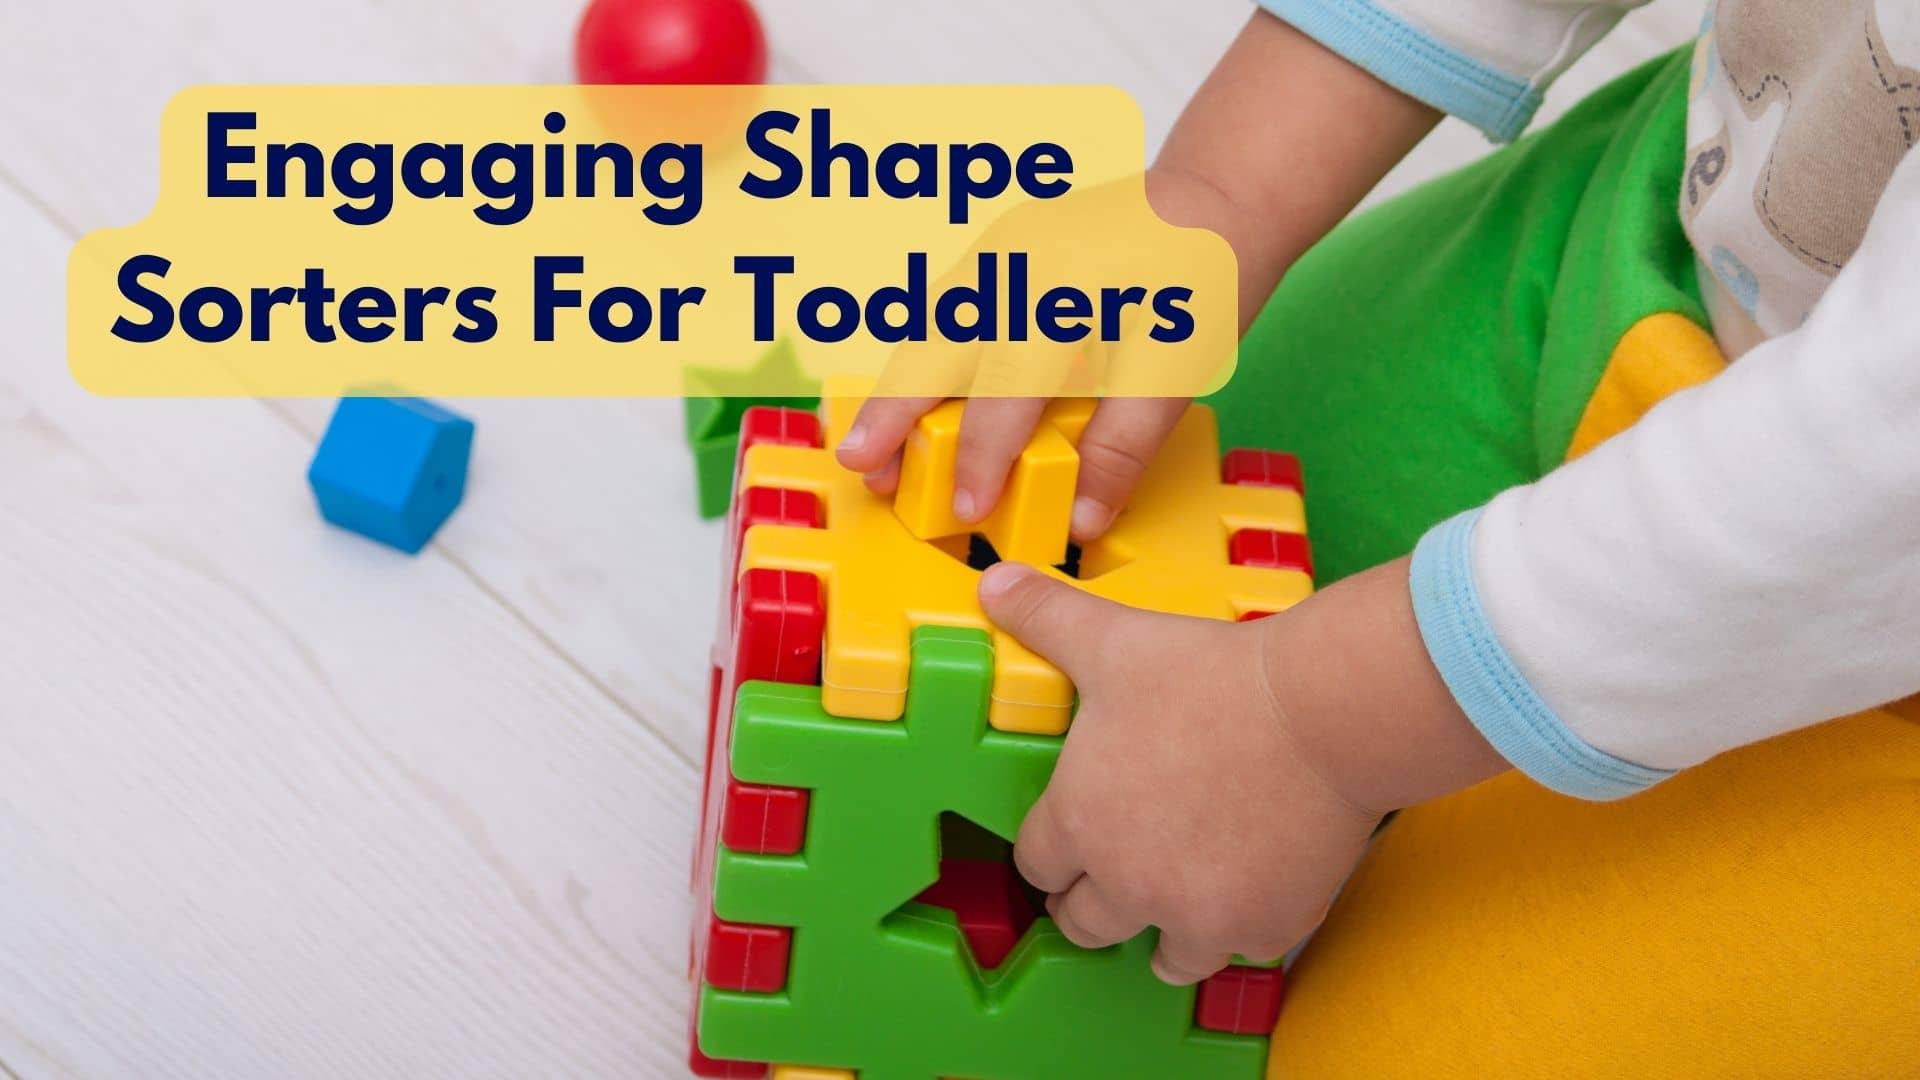 What Are Some Engaging Shape Sorters For Toddlers?